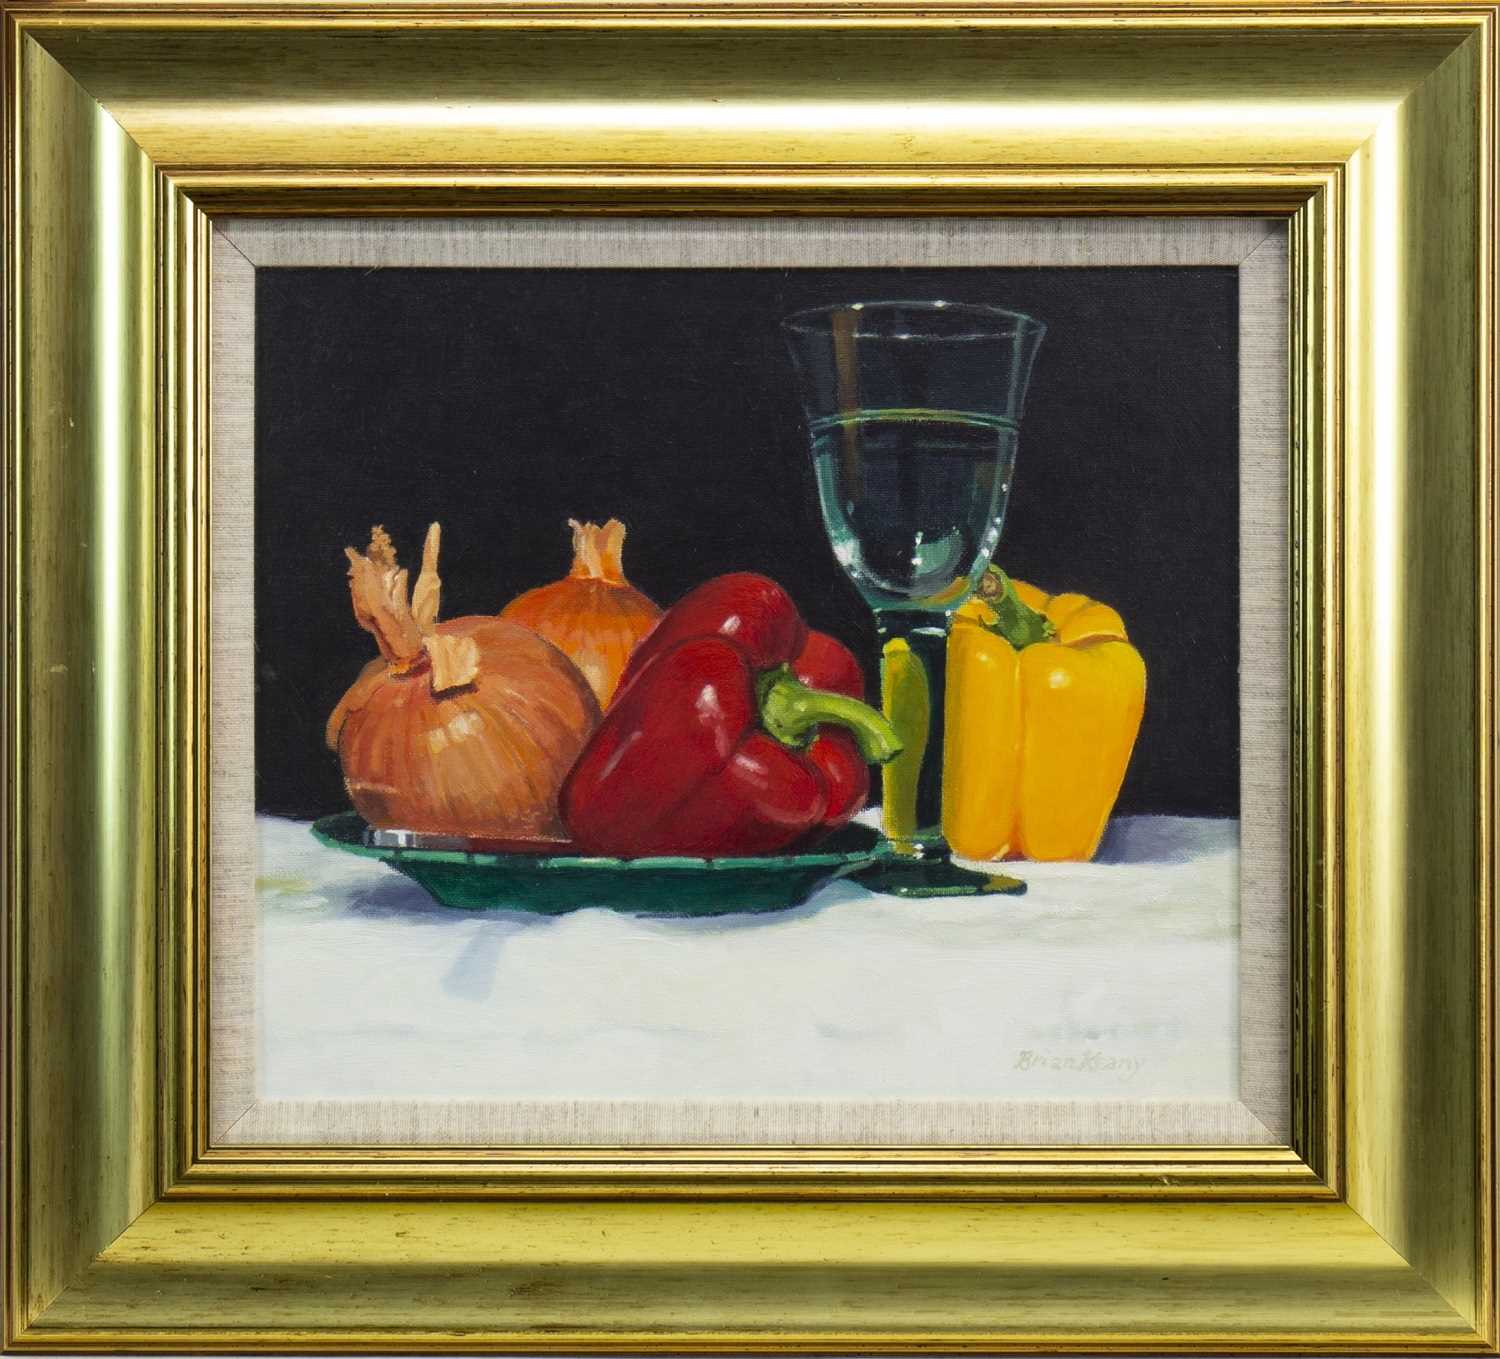 Lot 520 - ONIONS, PEPPERS AND GLASS, AN OIL BY BRIAN KEANY